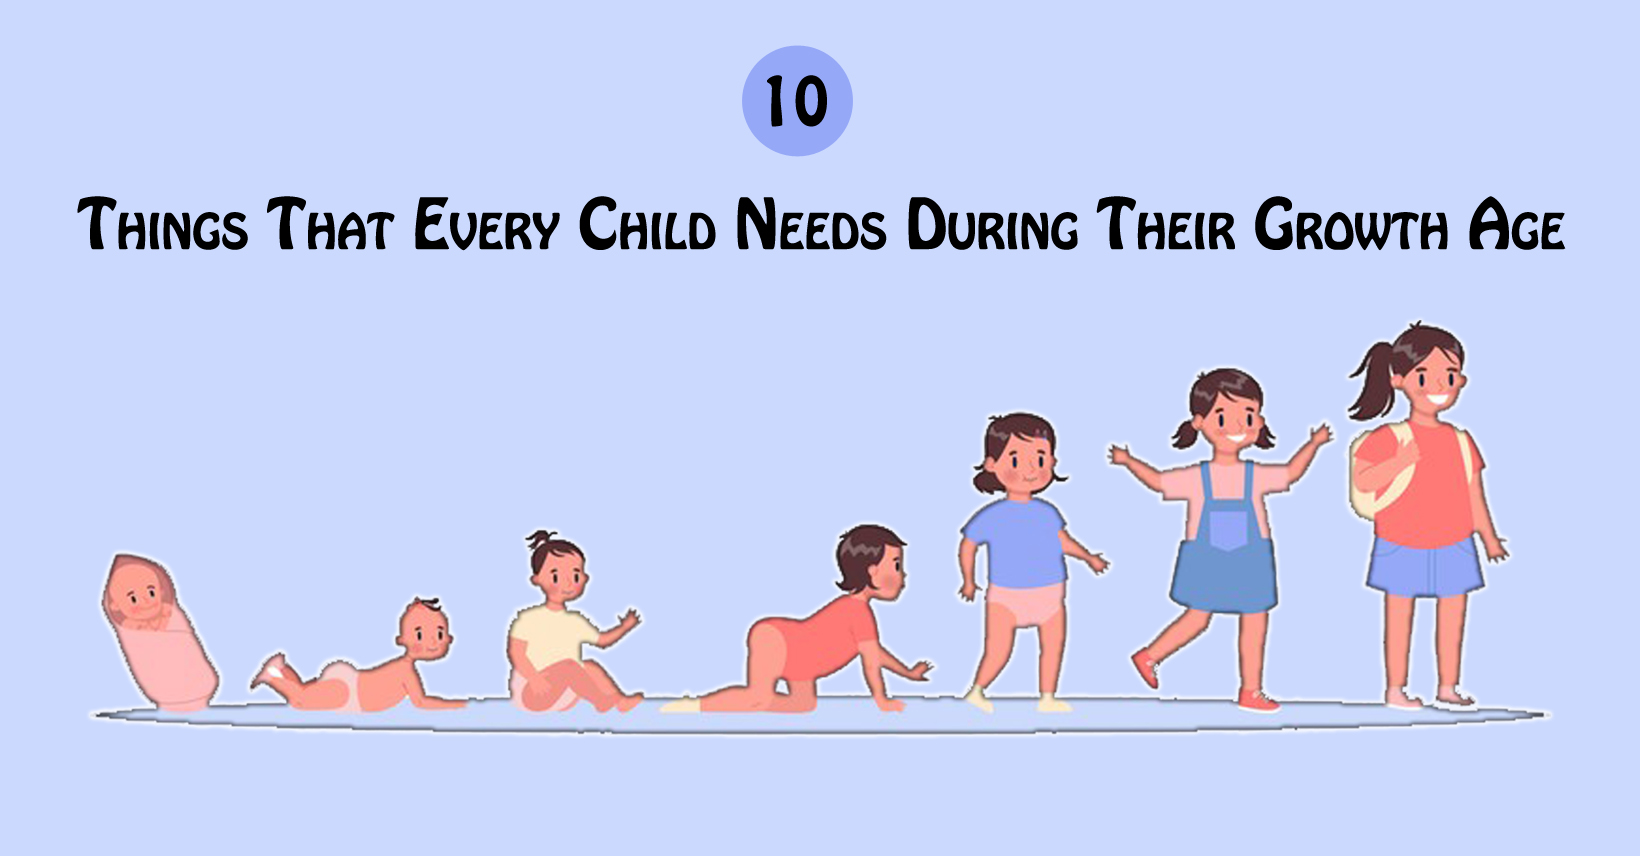 10 Things That Every Child Needs During Their Growth Age